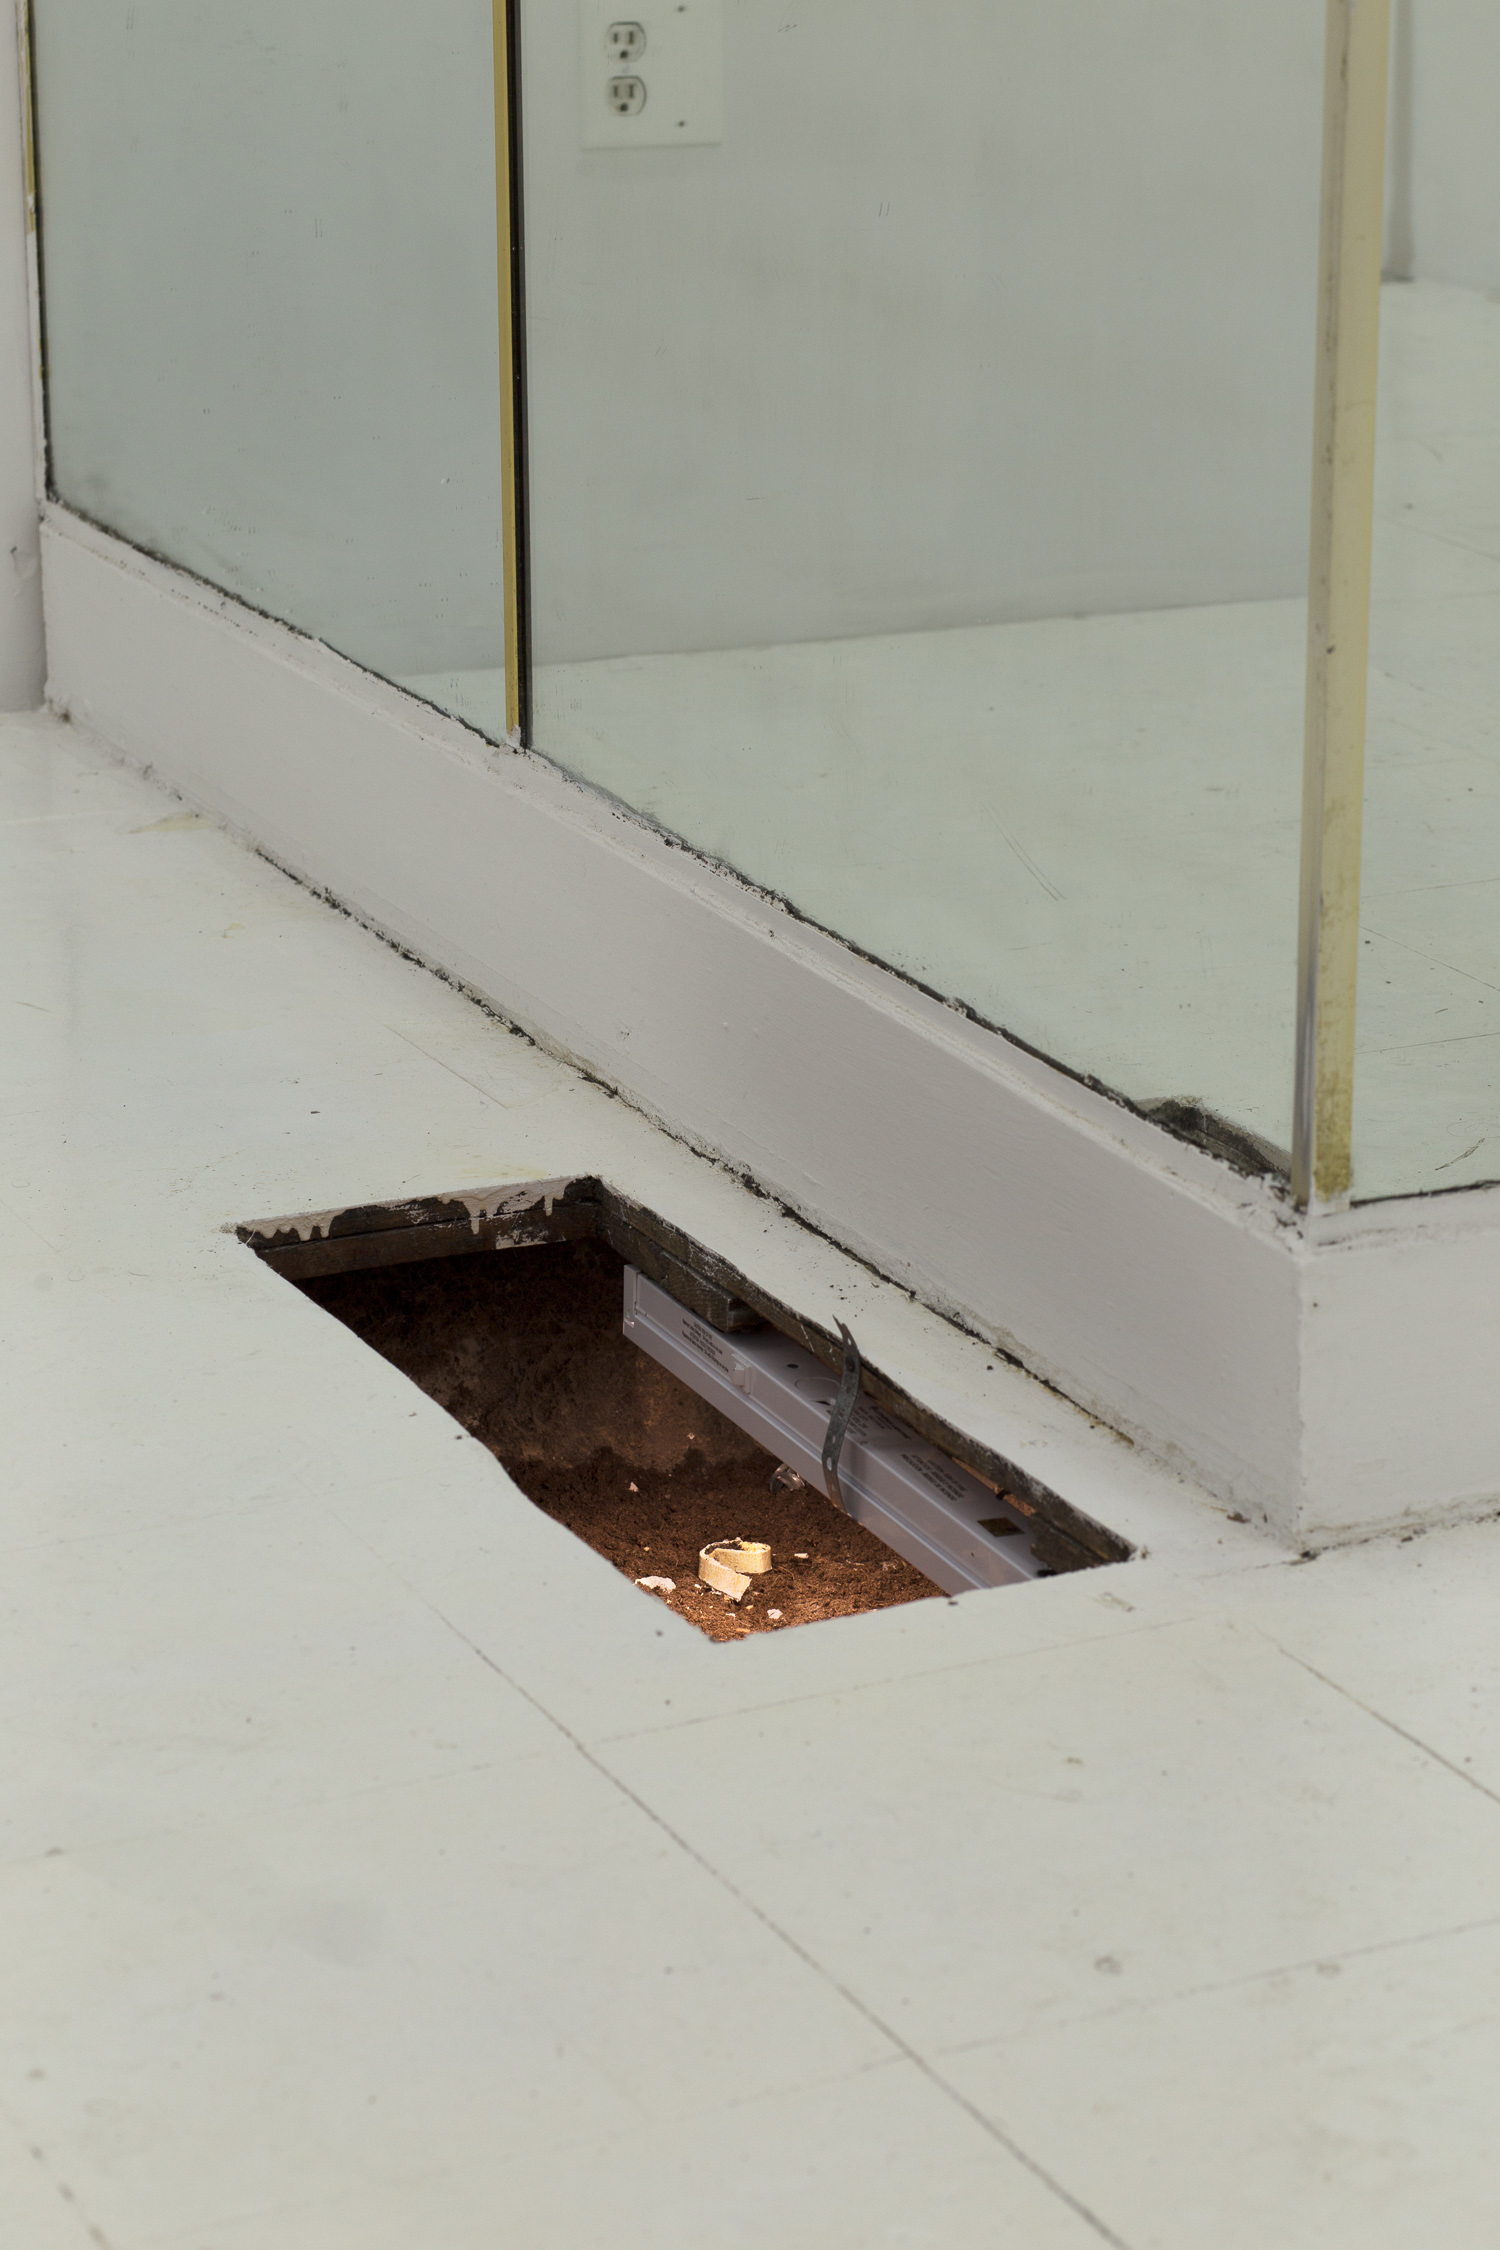 A hole in the floor is illuminated by a long fluorescent